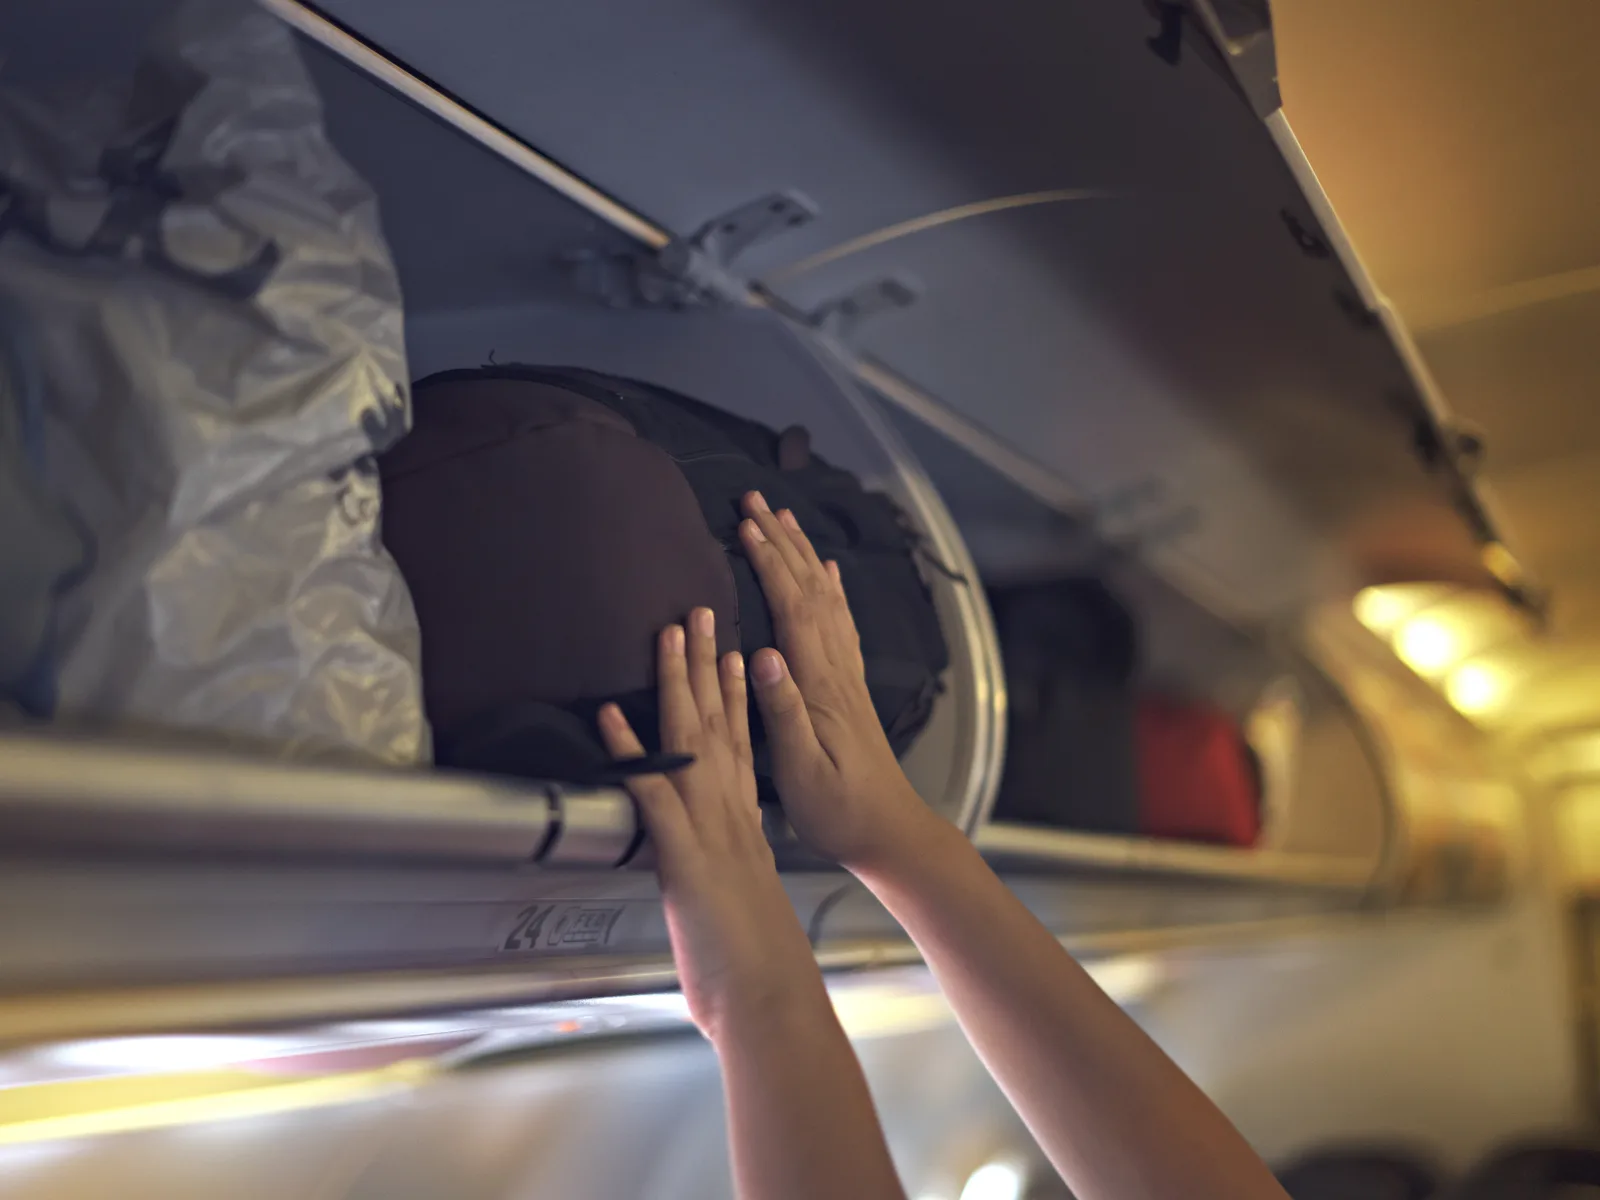 Person loading one of the best carry-on backpacks into an overhead bin in an airplane